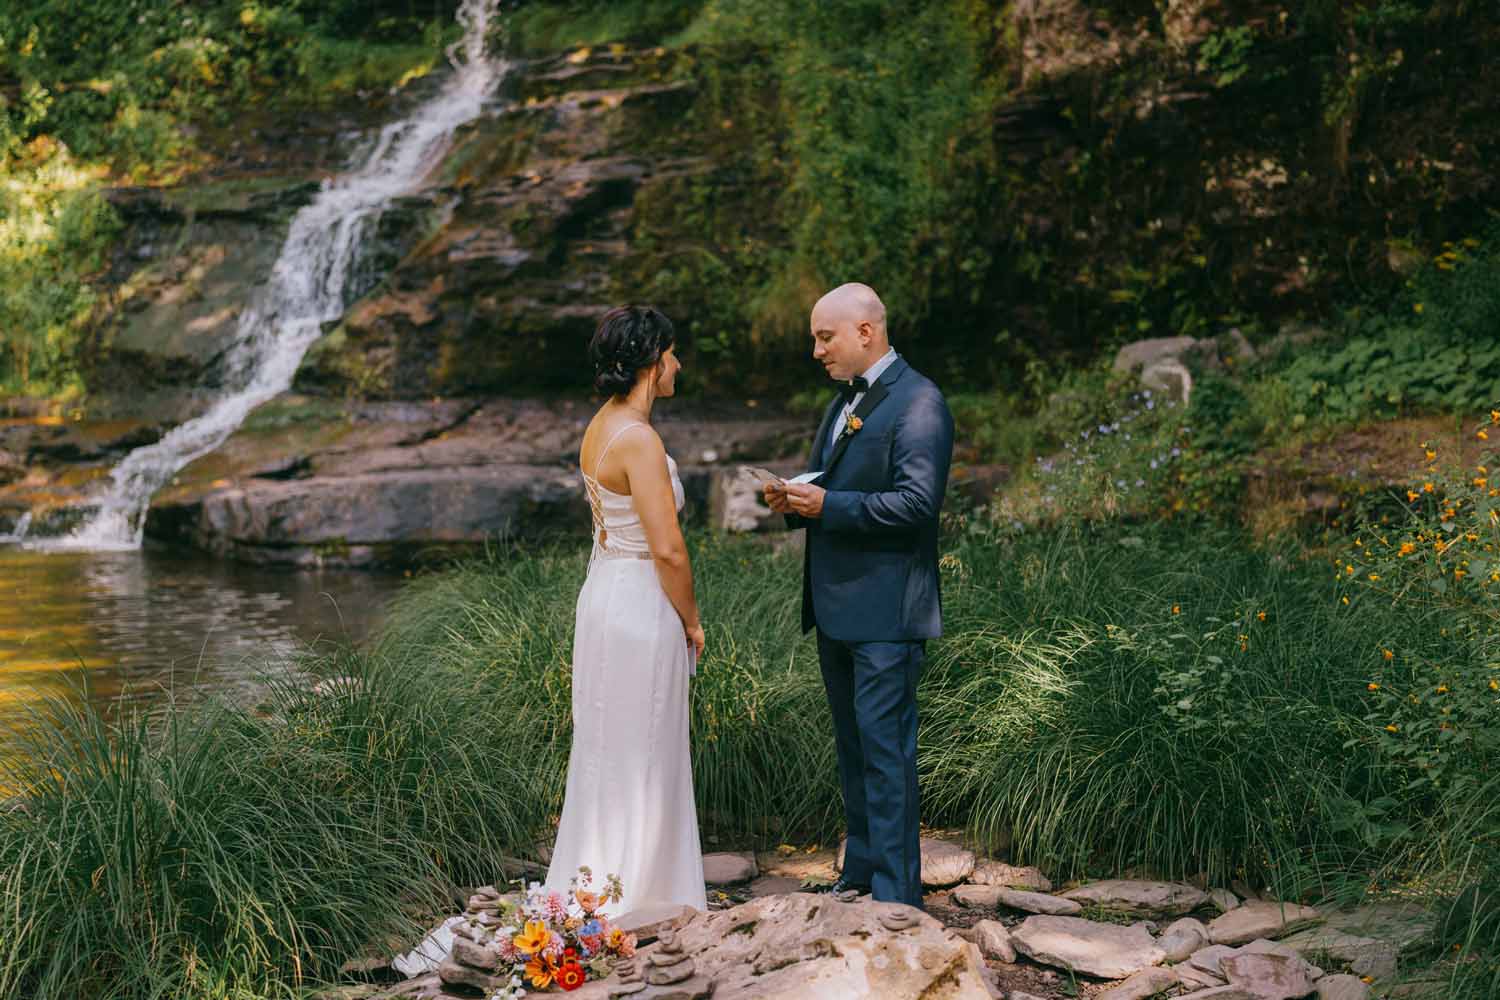 Hudson Valley and Catskills Elopement Options